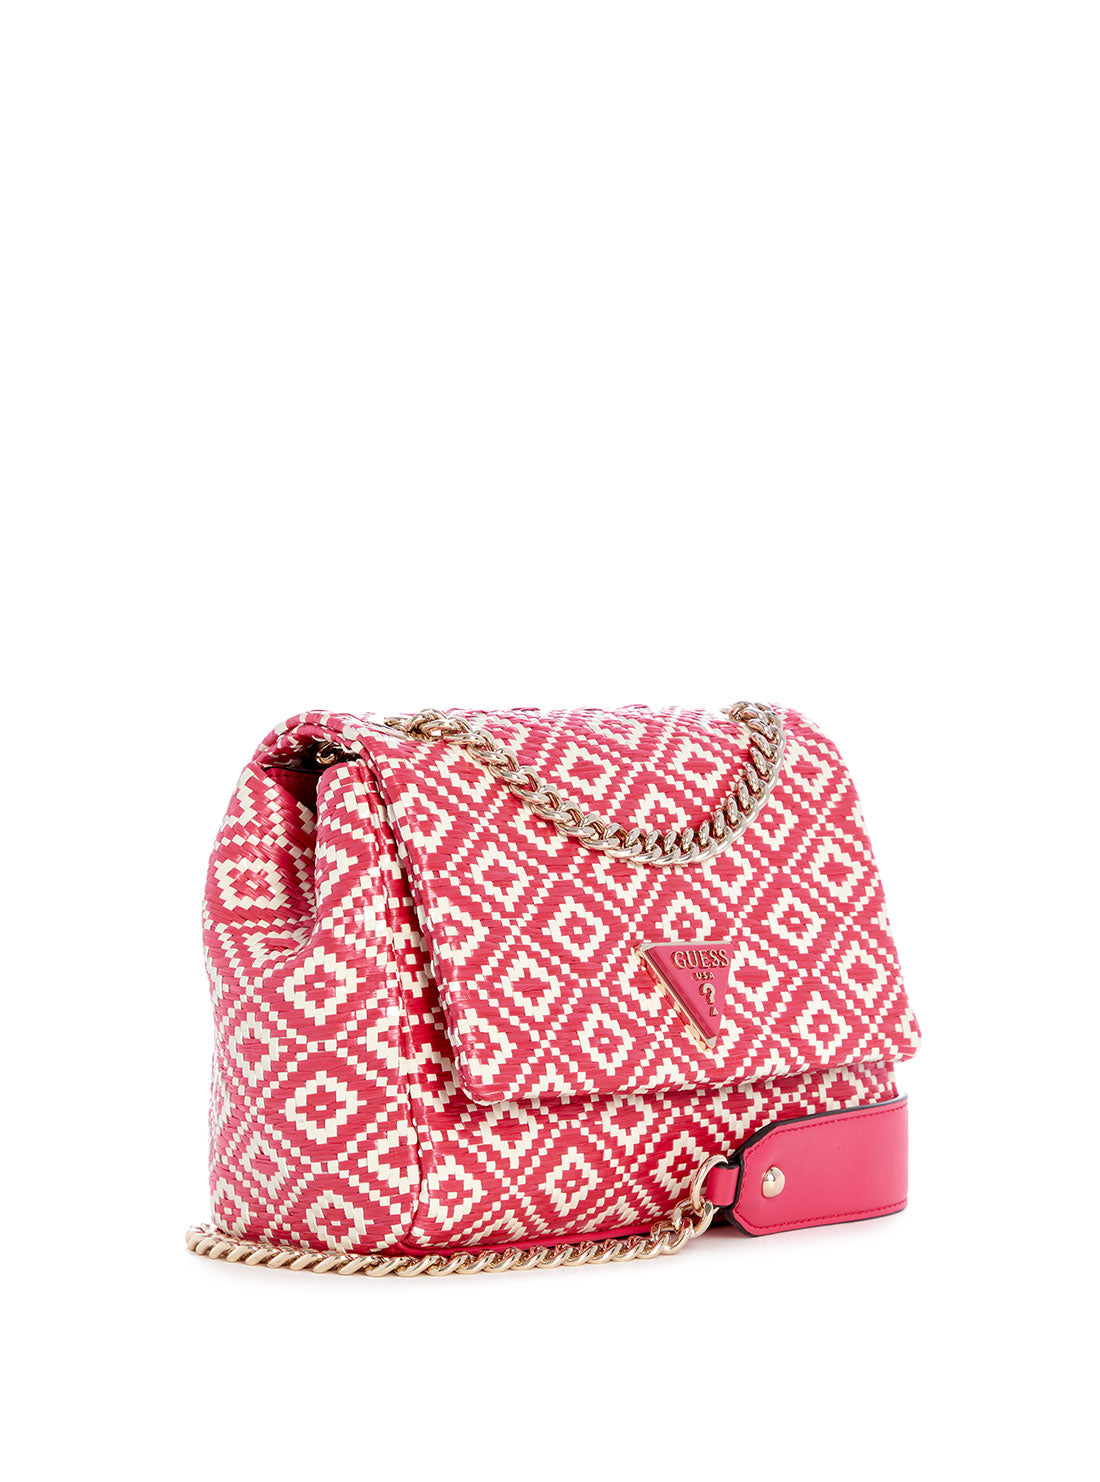 GUESS Pink Rianee Crossbody Flap Bag side view